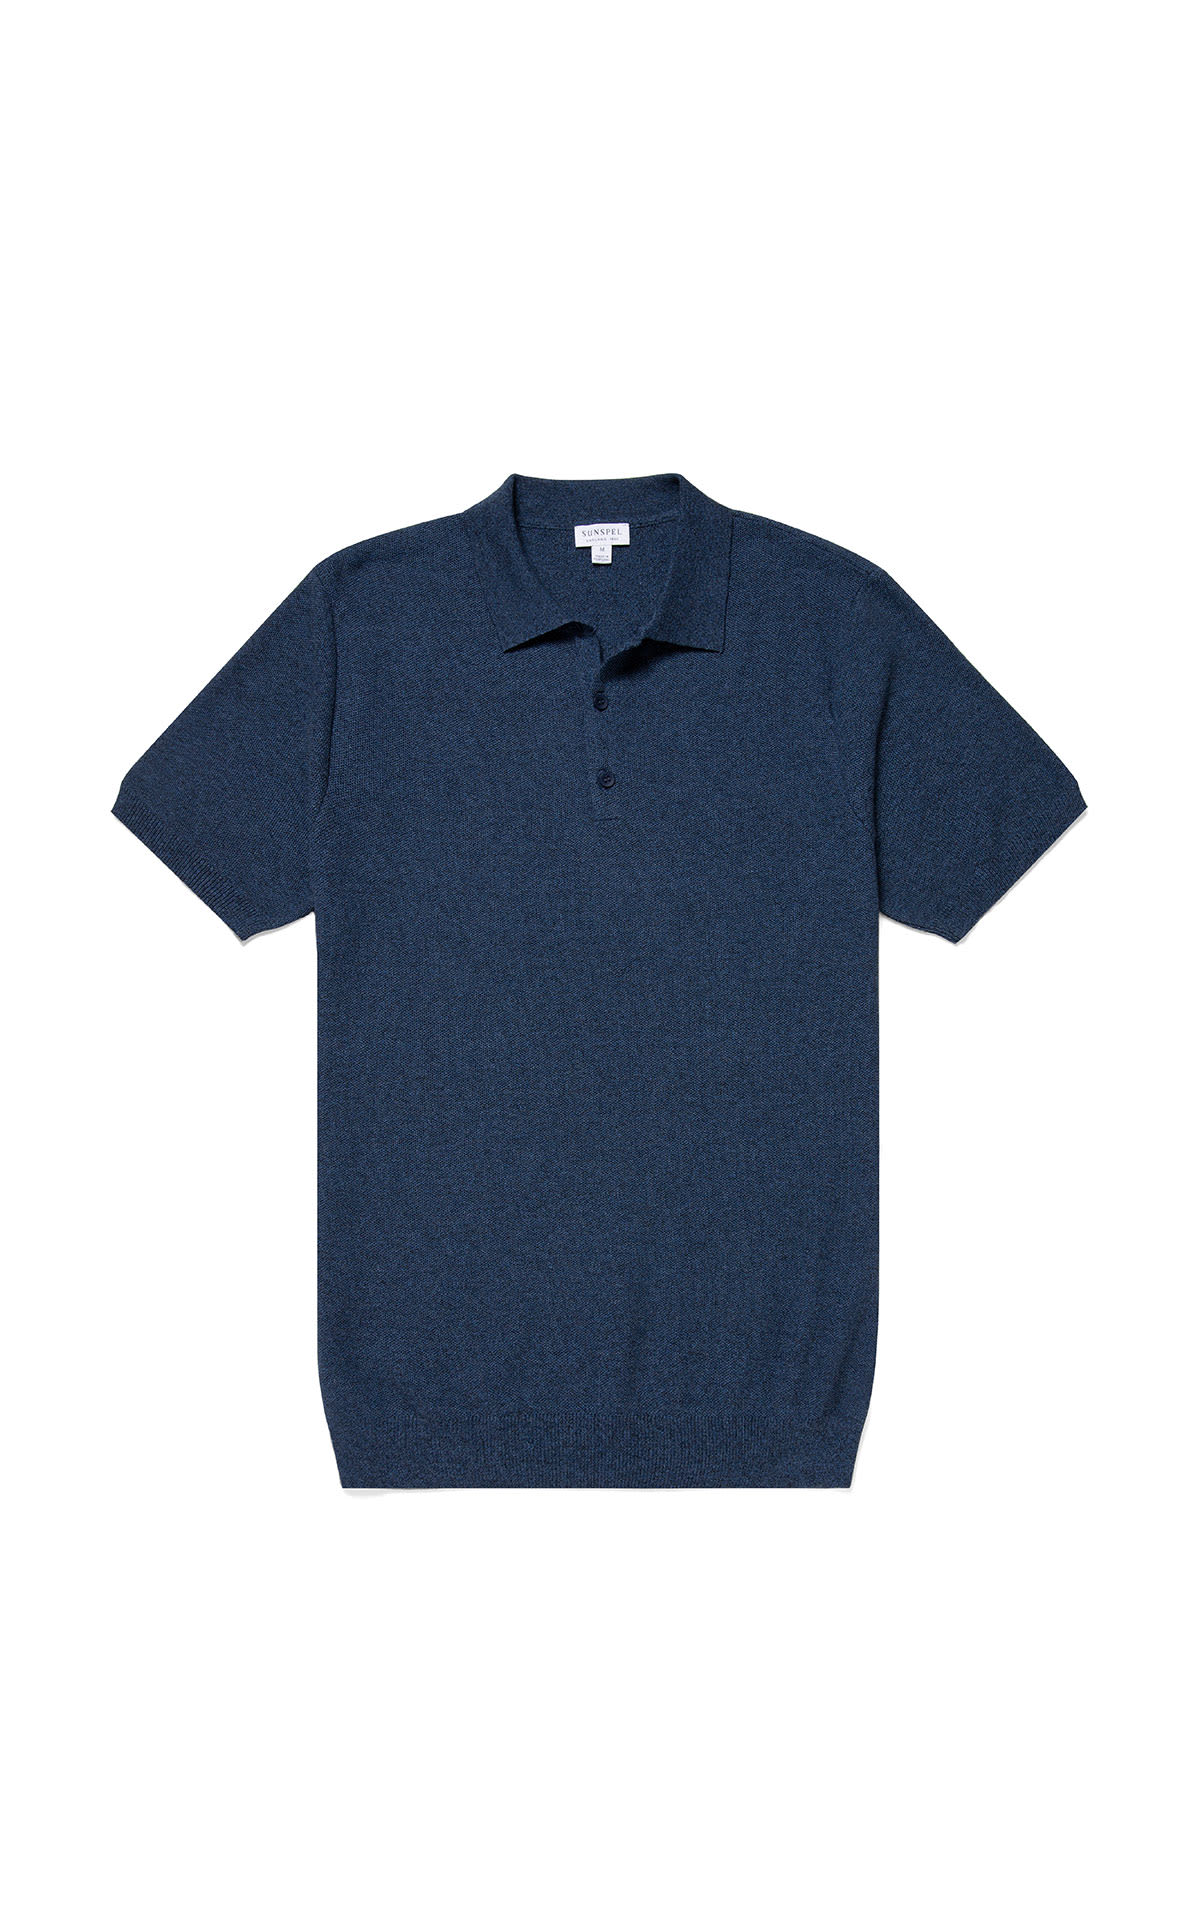 Sunspel Fine texture knit polo shirt from Bicester Village